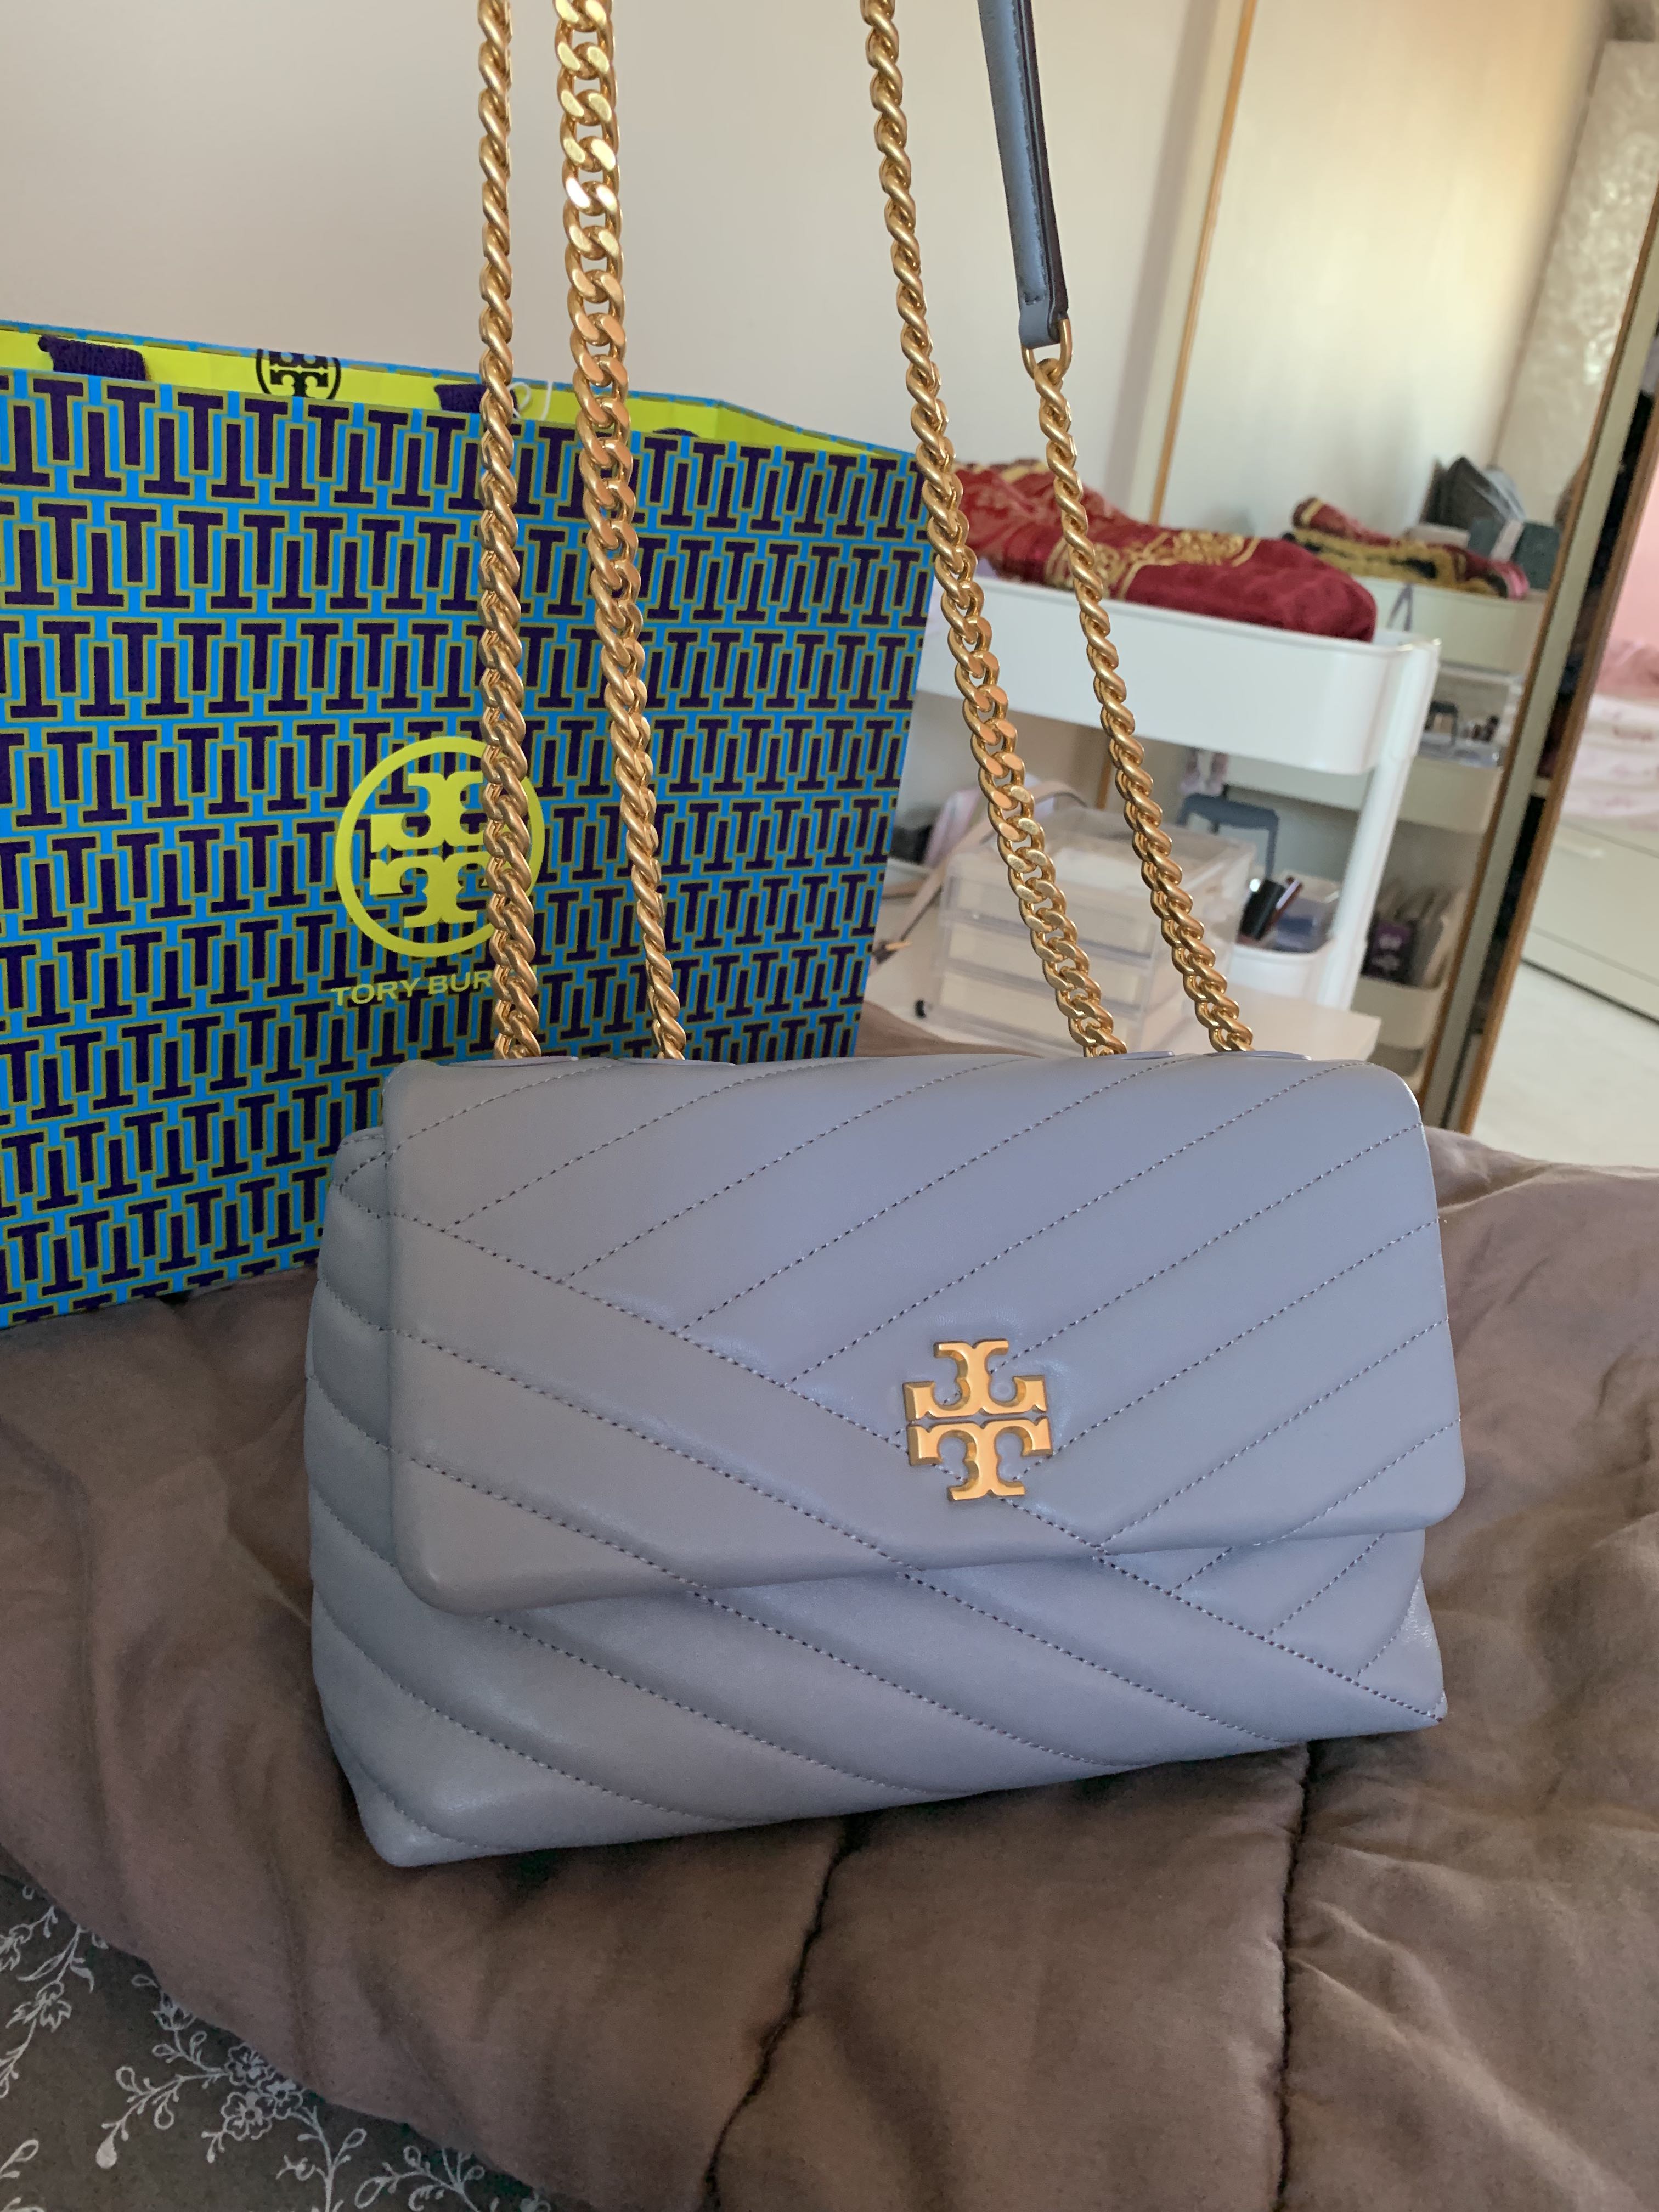 Tory Burch Kira Chevron Small Camera Bag in Cloud Blue Leather and